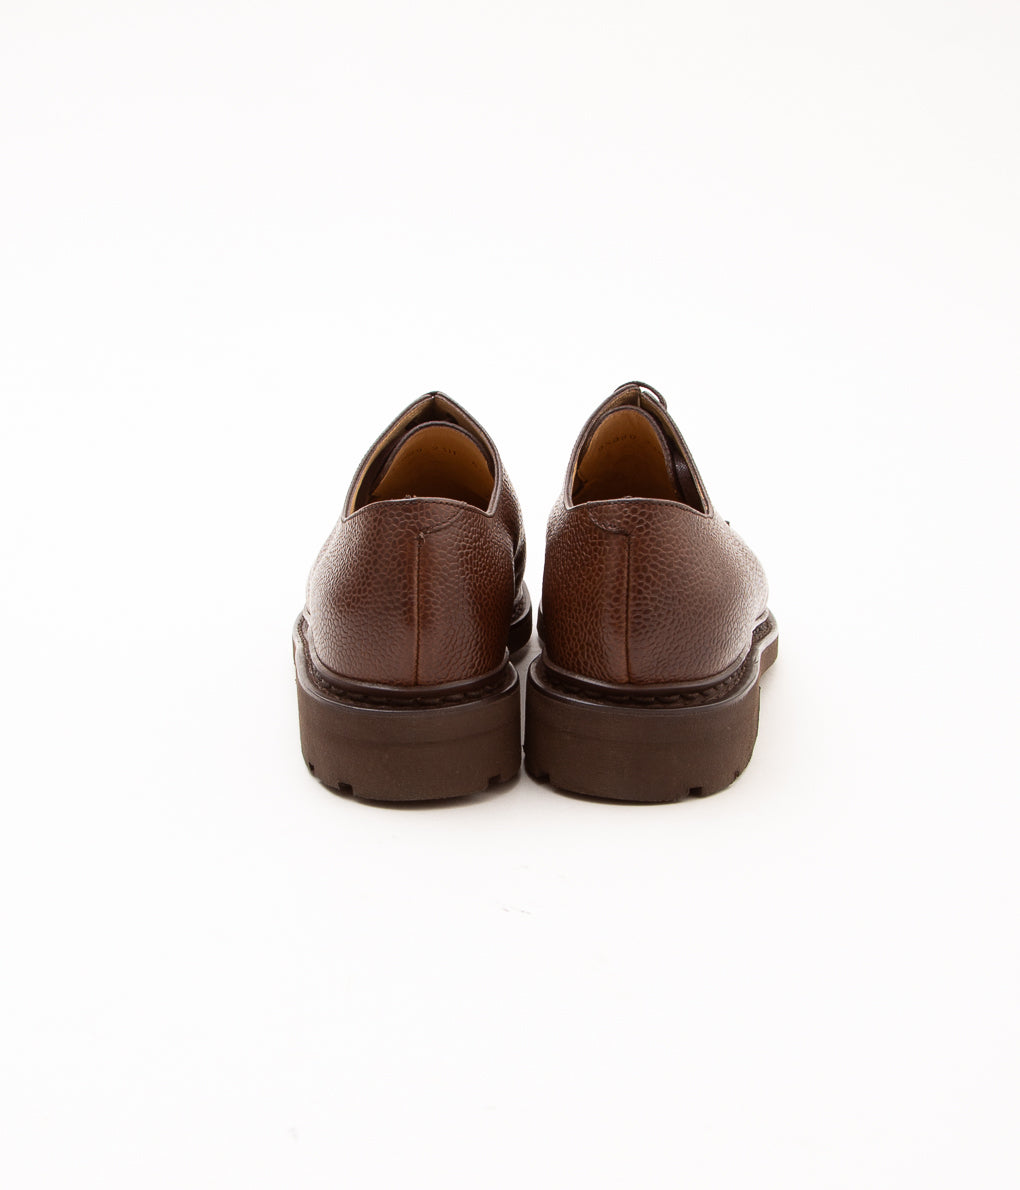 PARABOOT for ARPENTEUR "MIRAGE"(BROWN GRAINED CALF)